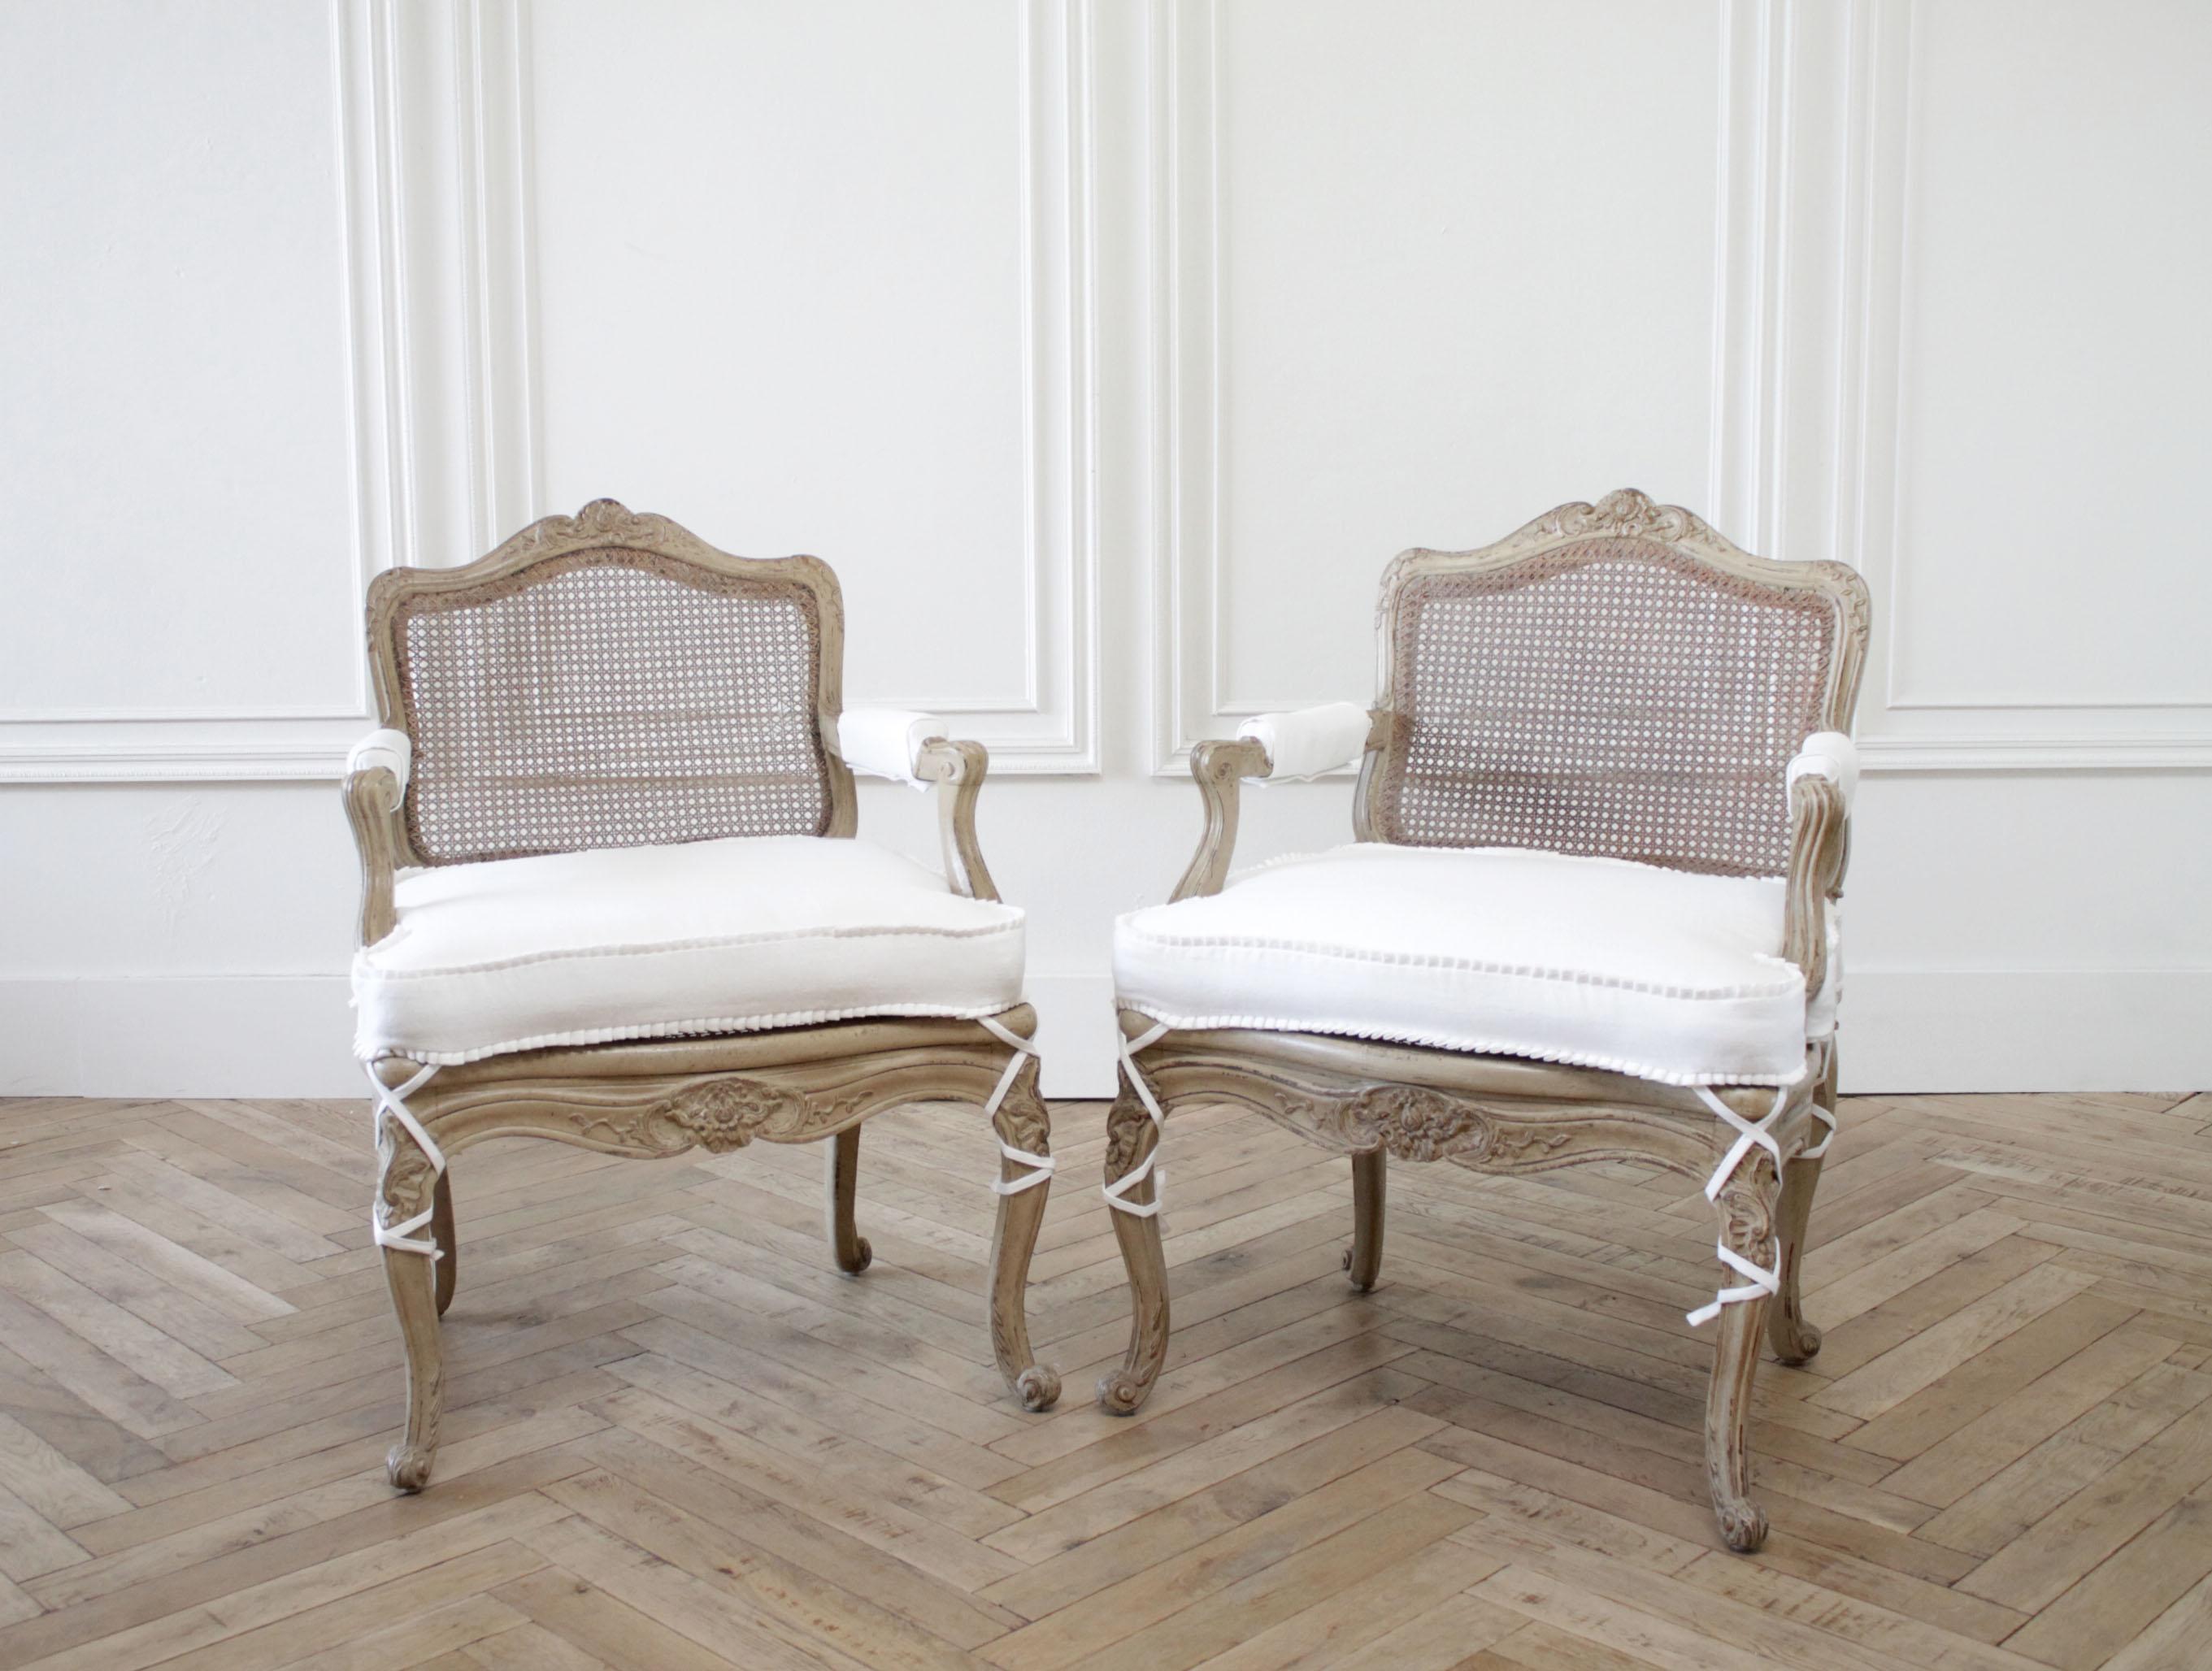 European Pair of Antique French Arm Chairs in Original Painted Finish and White Linen